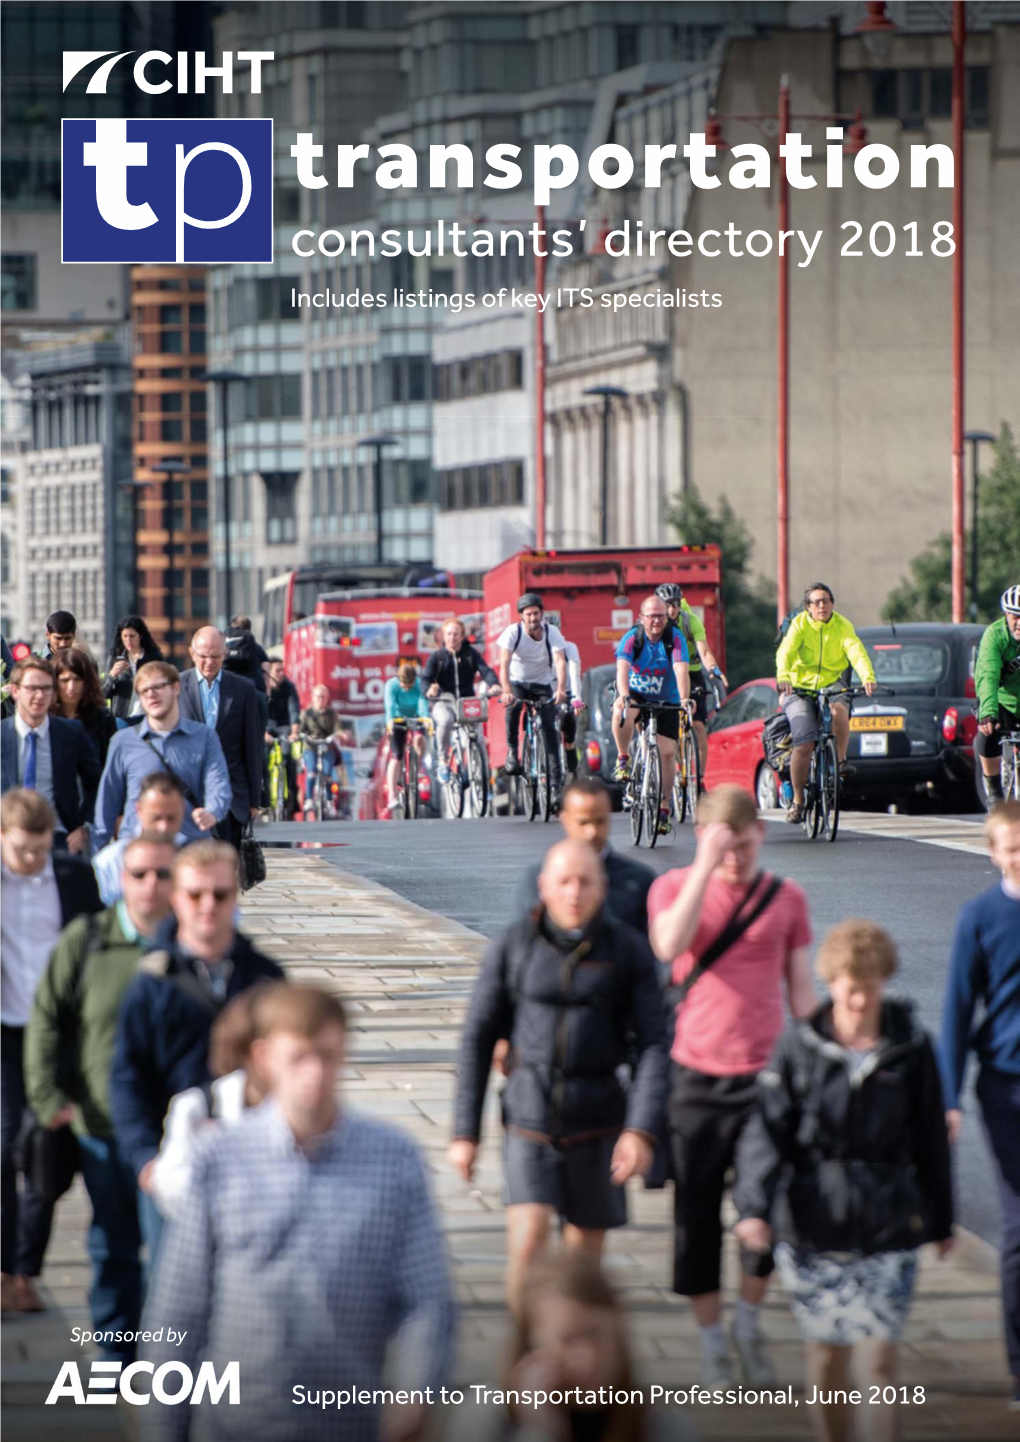 Transportation Consultants’ Directory 2018 Includes Listings of Key ITS Specialists